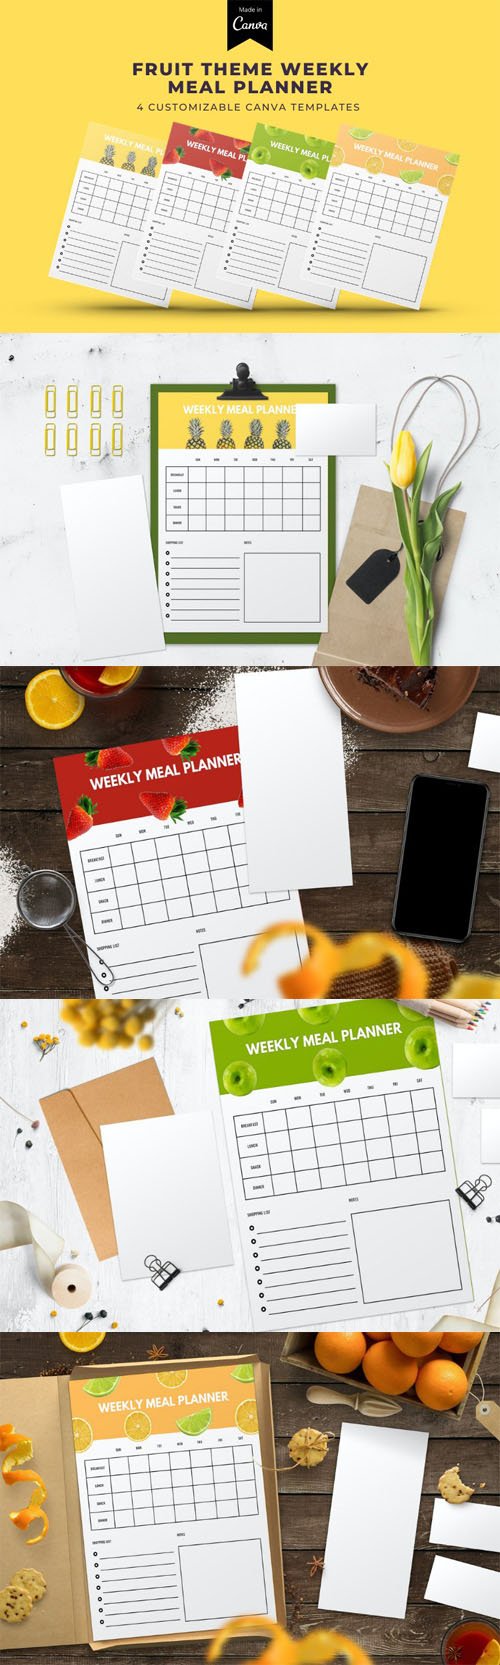 Fruit Theme Weekly Meal Planner - 4 Customizable Templates